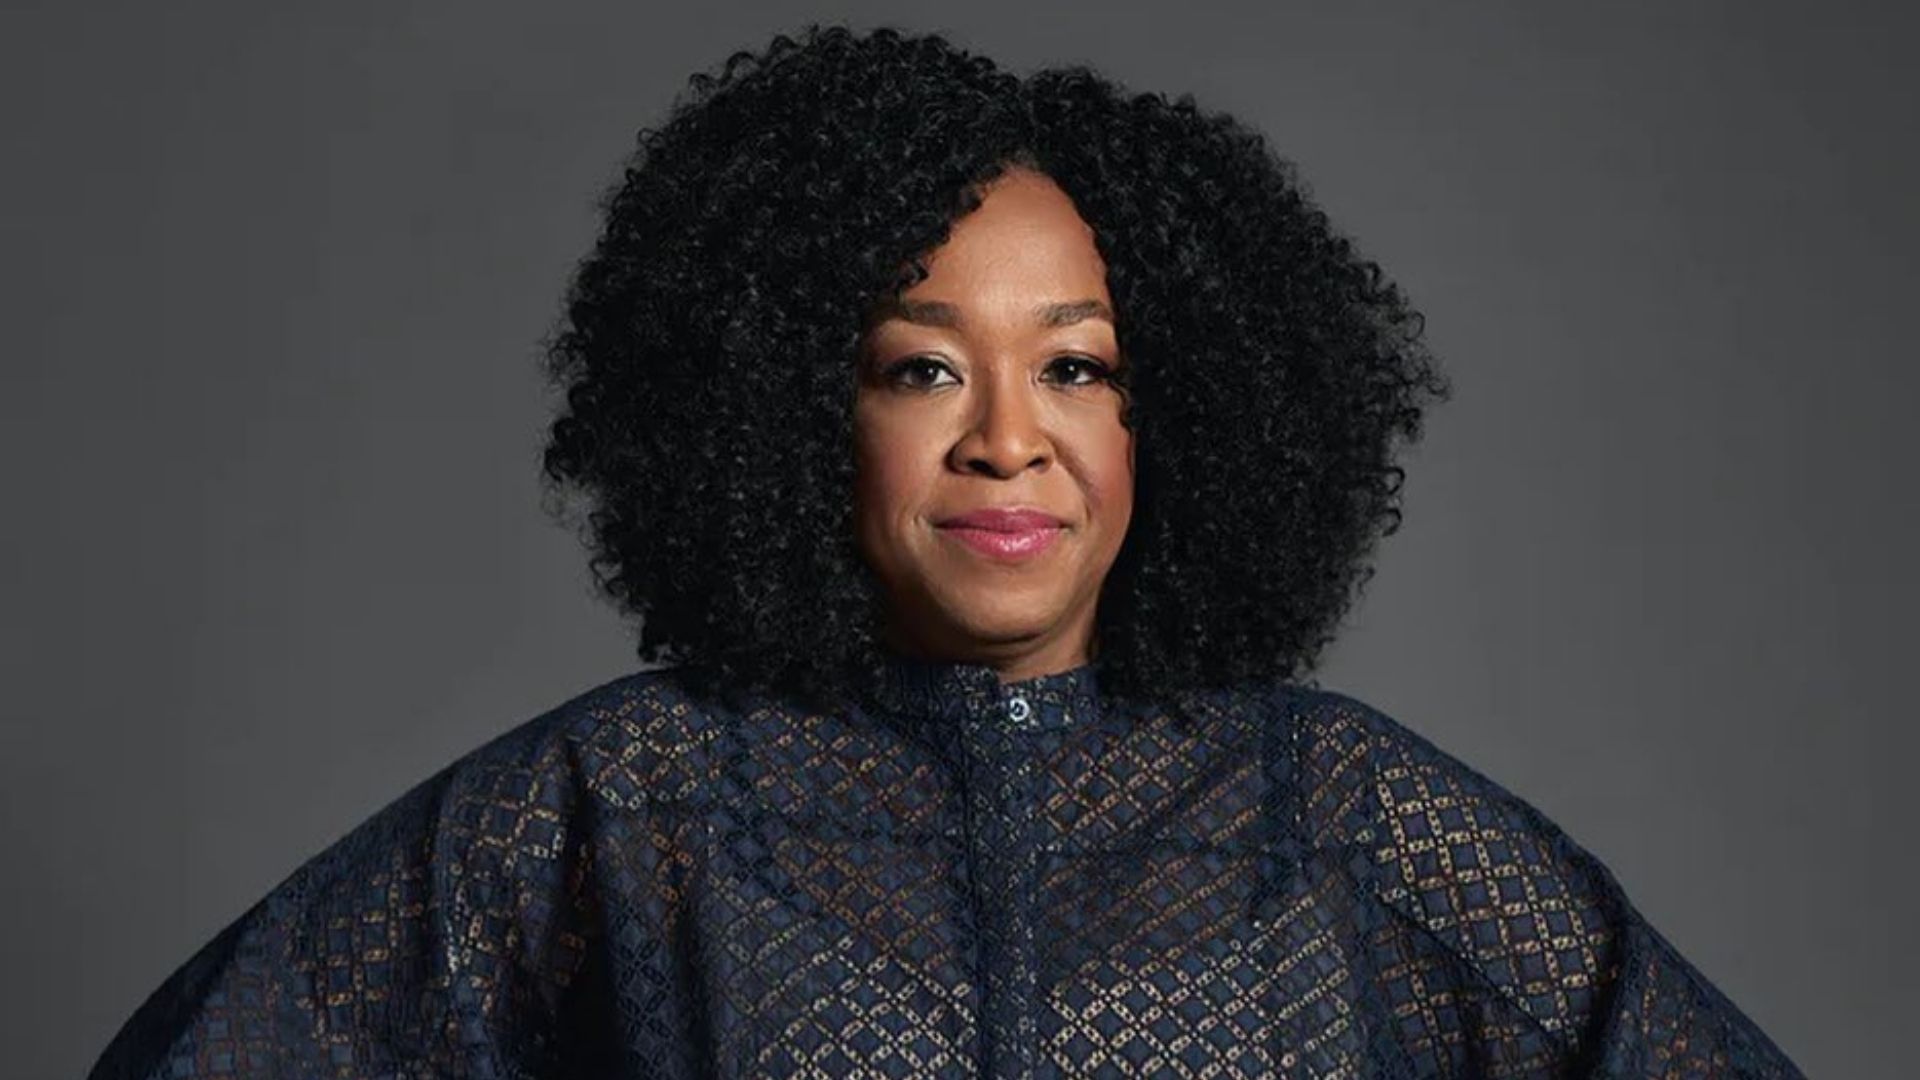 Forbes highest paid entertainers list: Shonda Rhimes